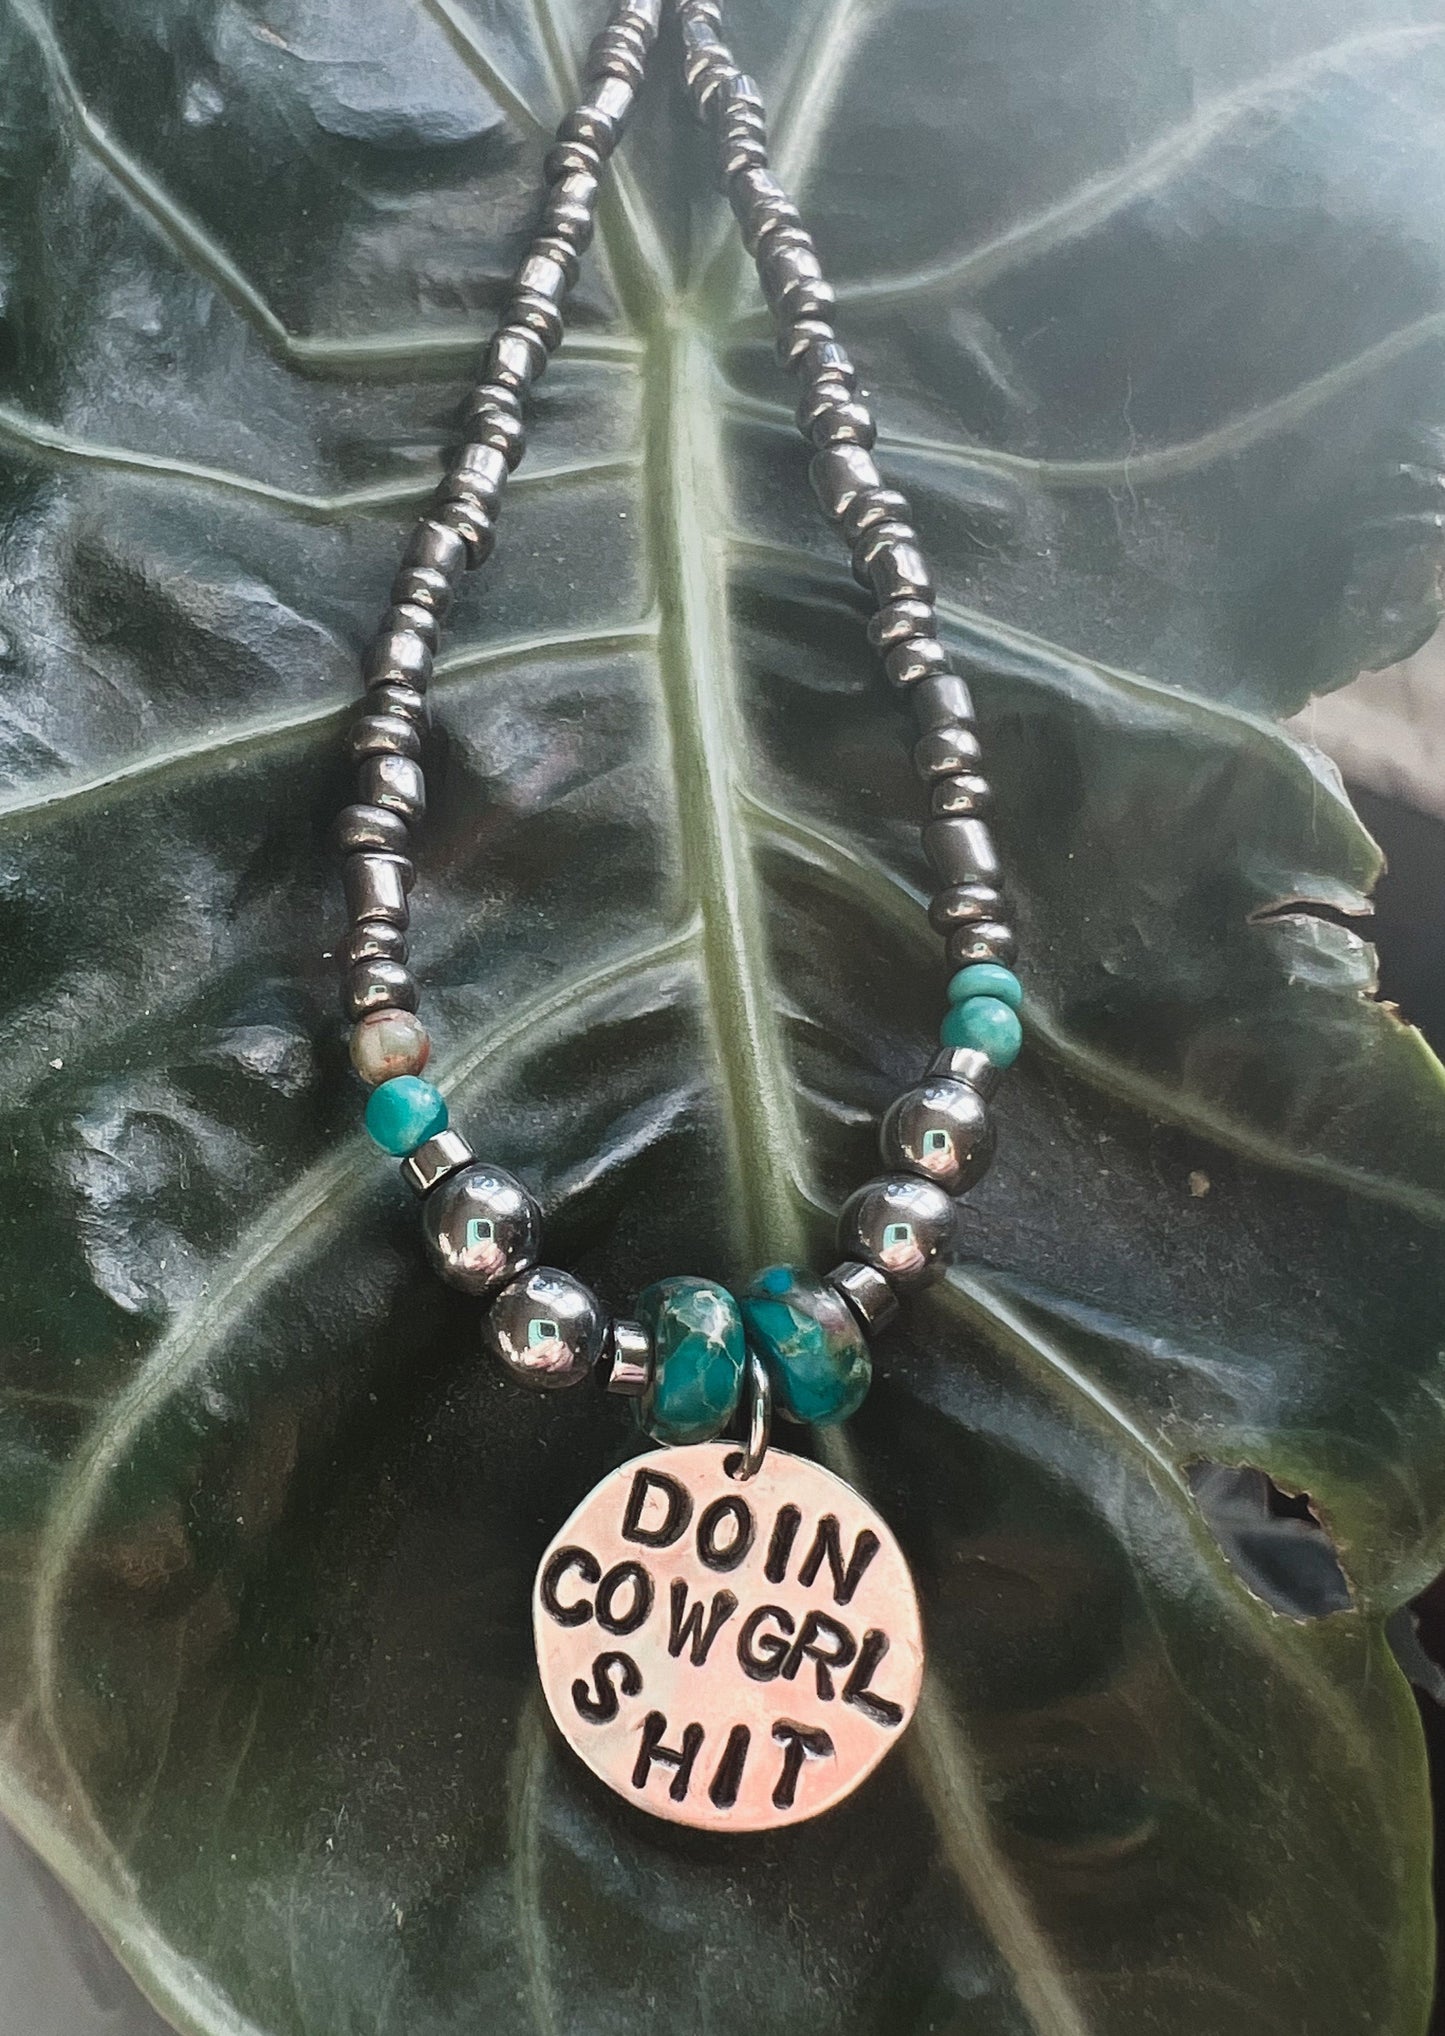 “Doin Cowgirl Shit” 18” Necklace